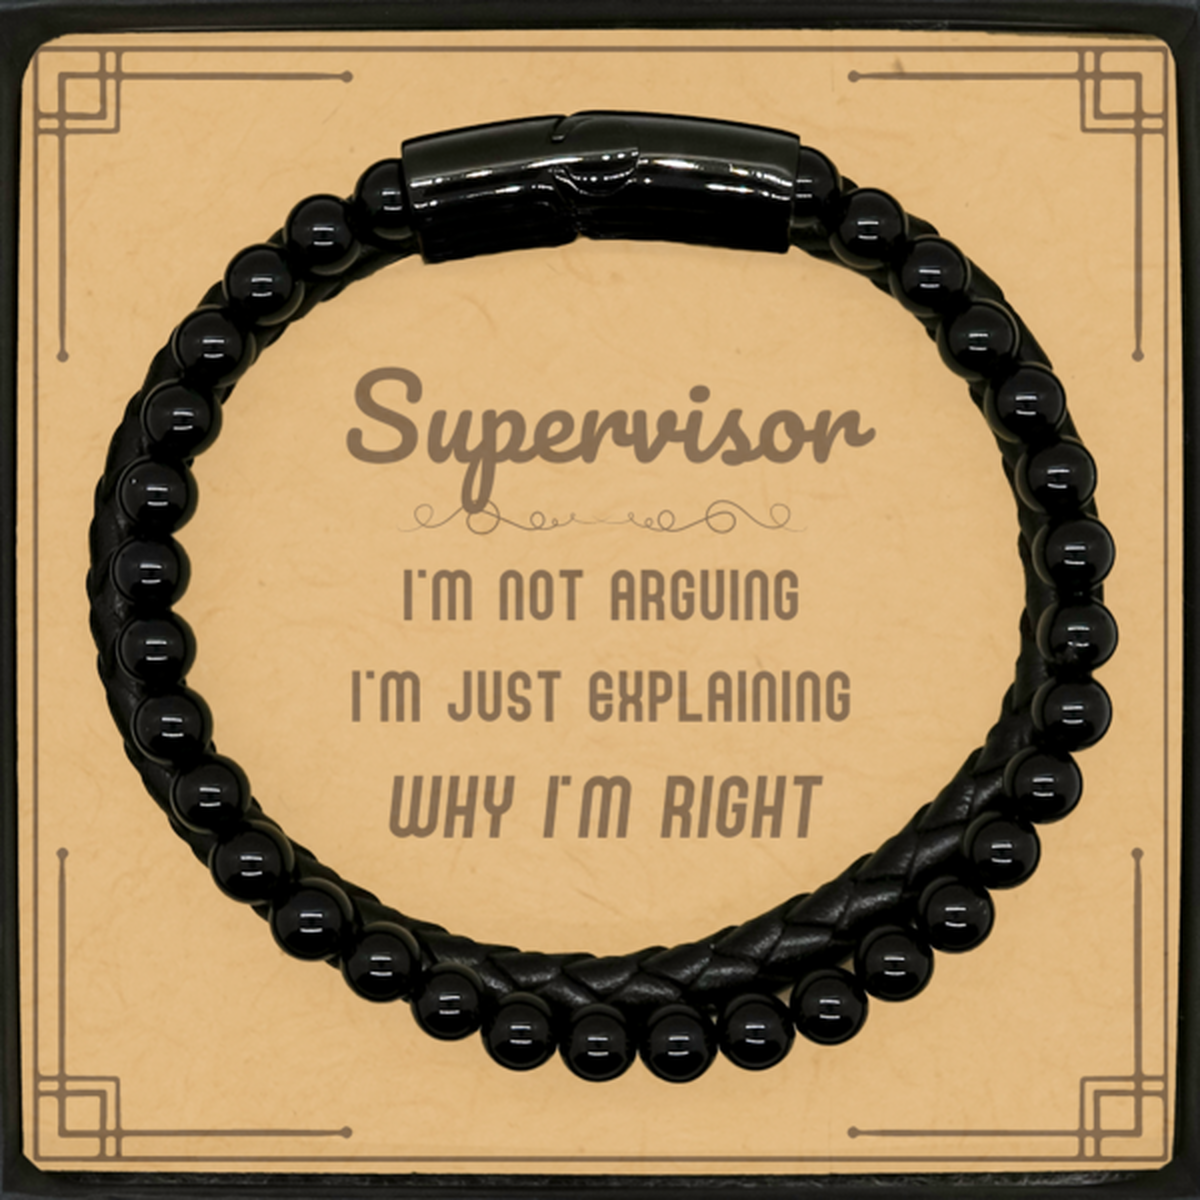 Supervisor I'm not Arguing. I'm Just Explaining Why I'm RIGHT Stone Leather Bracelets, Funny Saying Quote Supervisor Gifts For Supervisor Message Card Graduation Birthday Christmas Gifts for Men Women Coworker